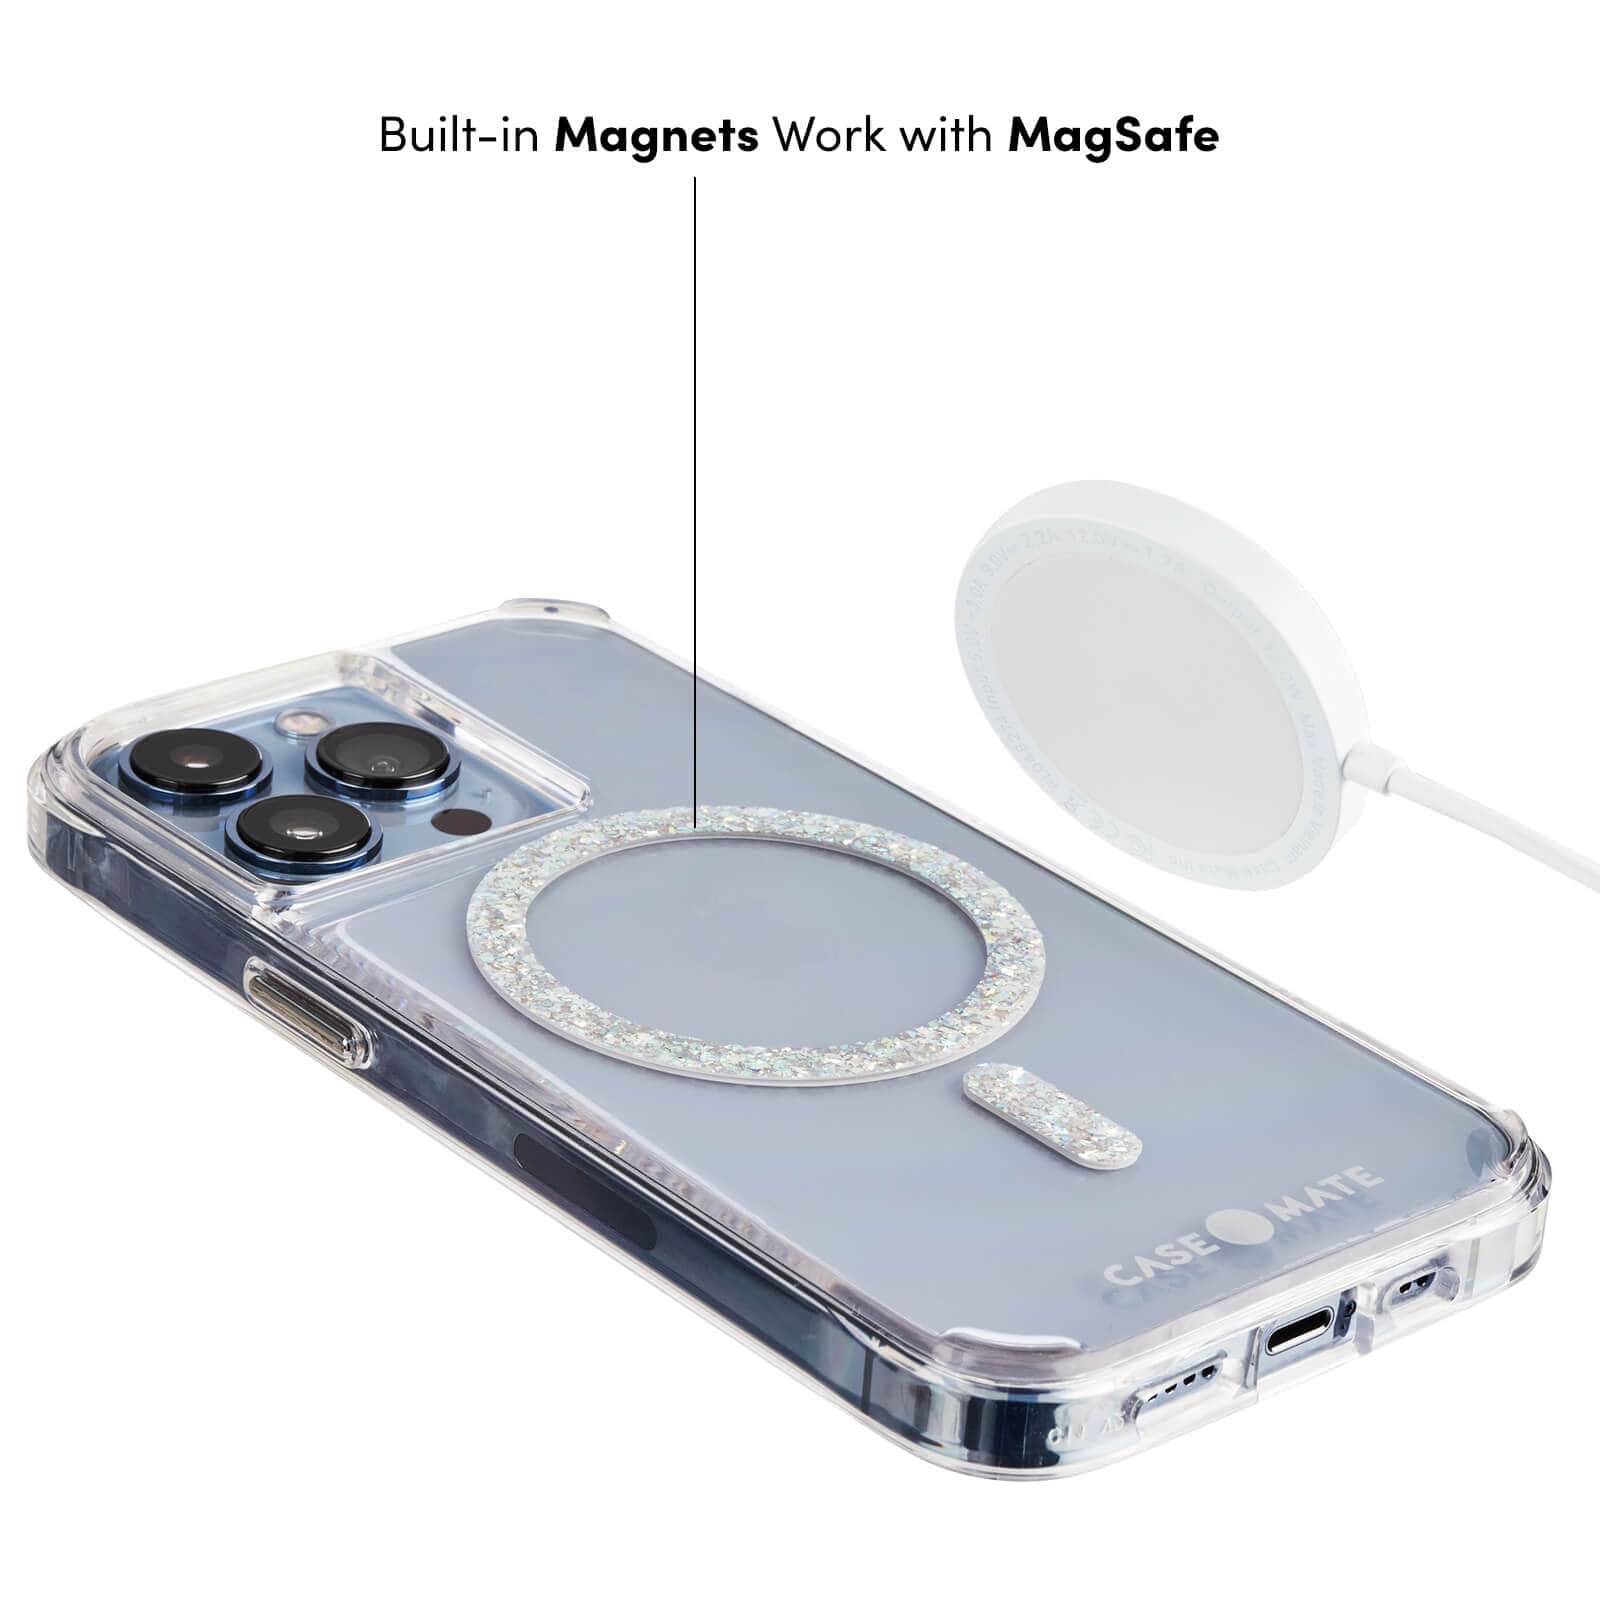 BUILT-IN MAGNETS WORK WITH MAGSAFE. COLOR::TWINKLE STARDUST